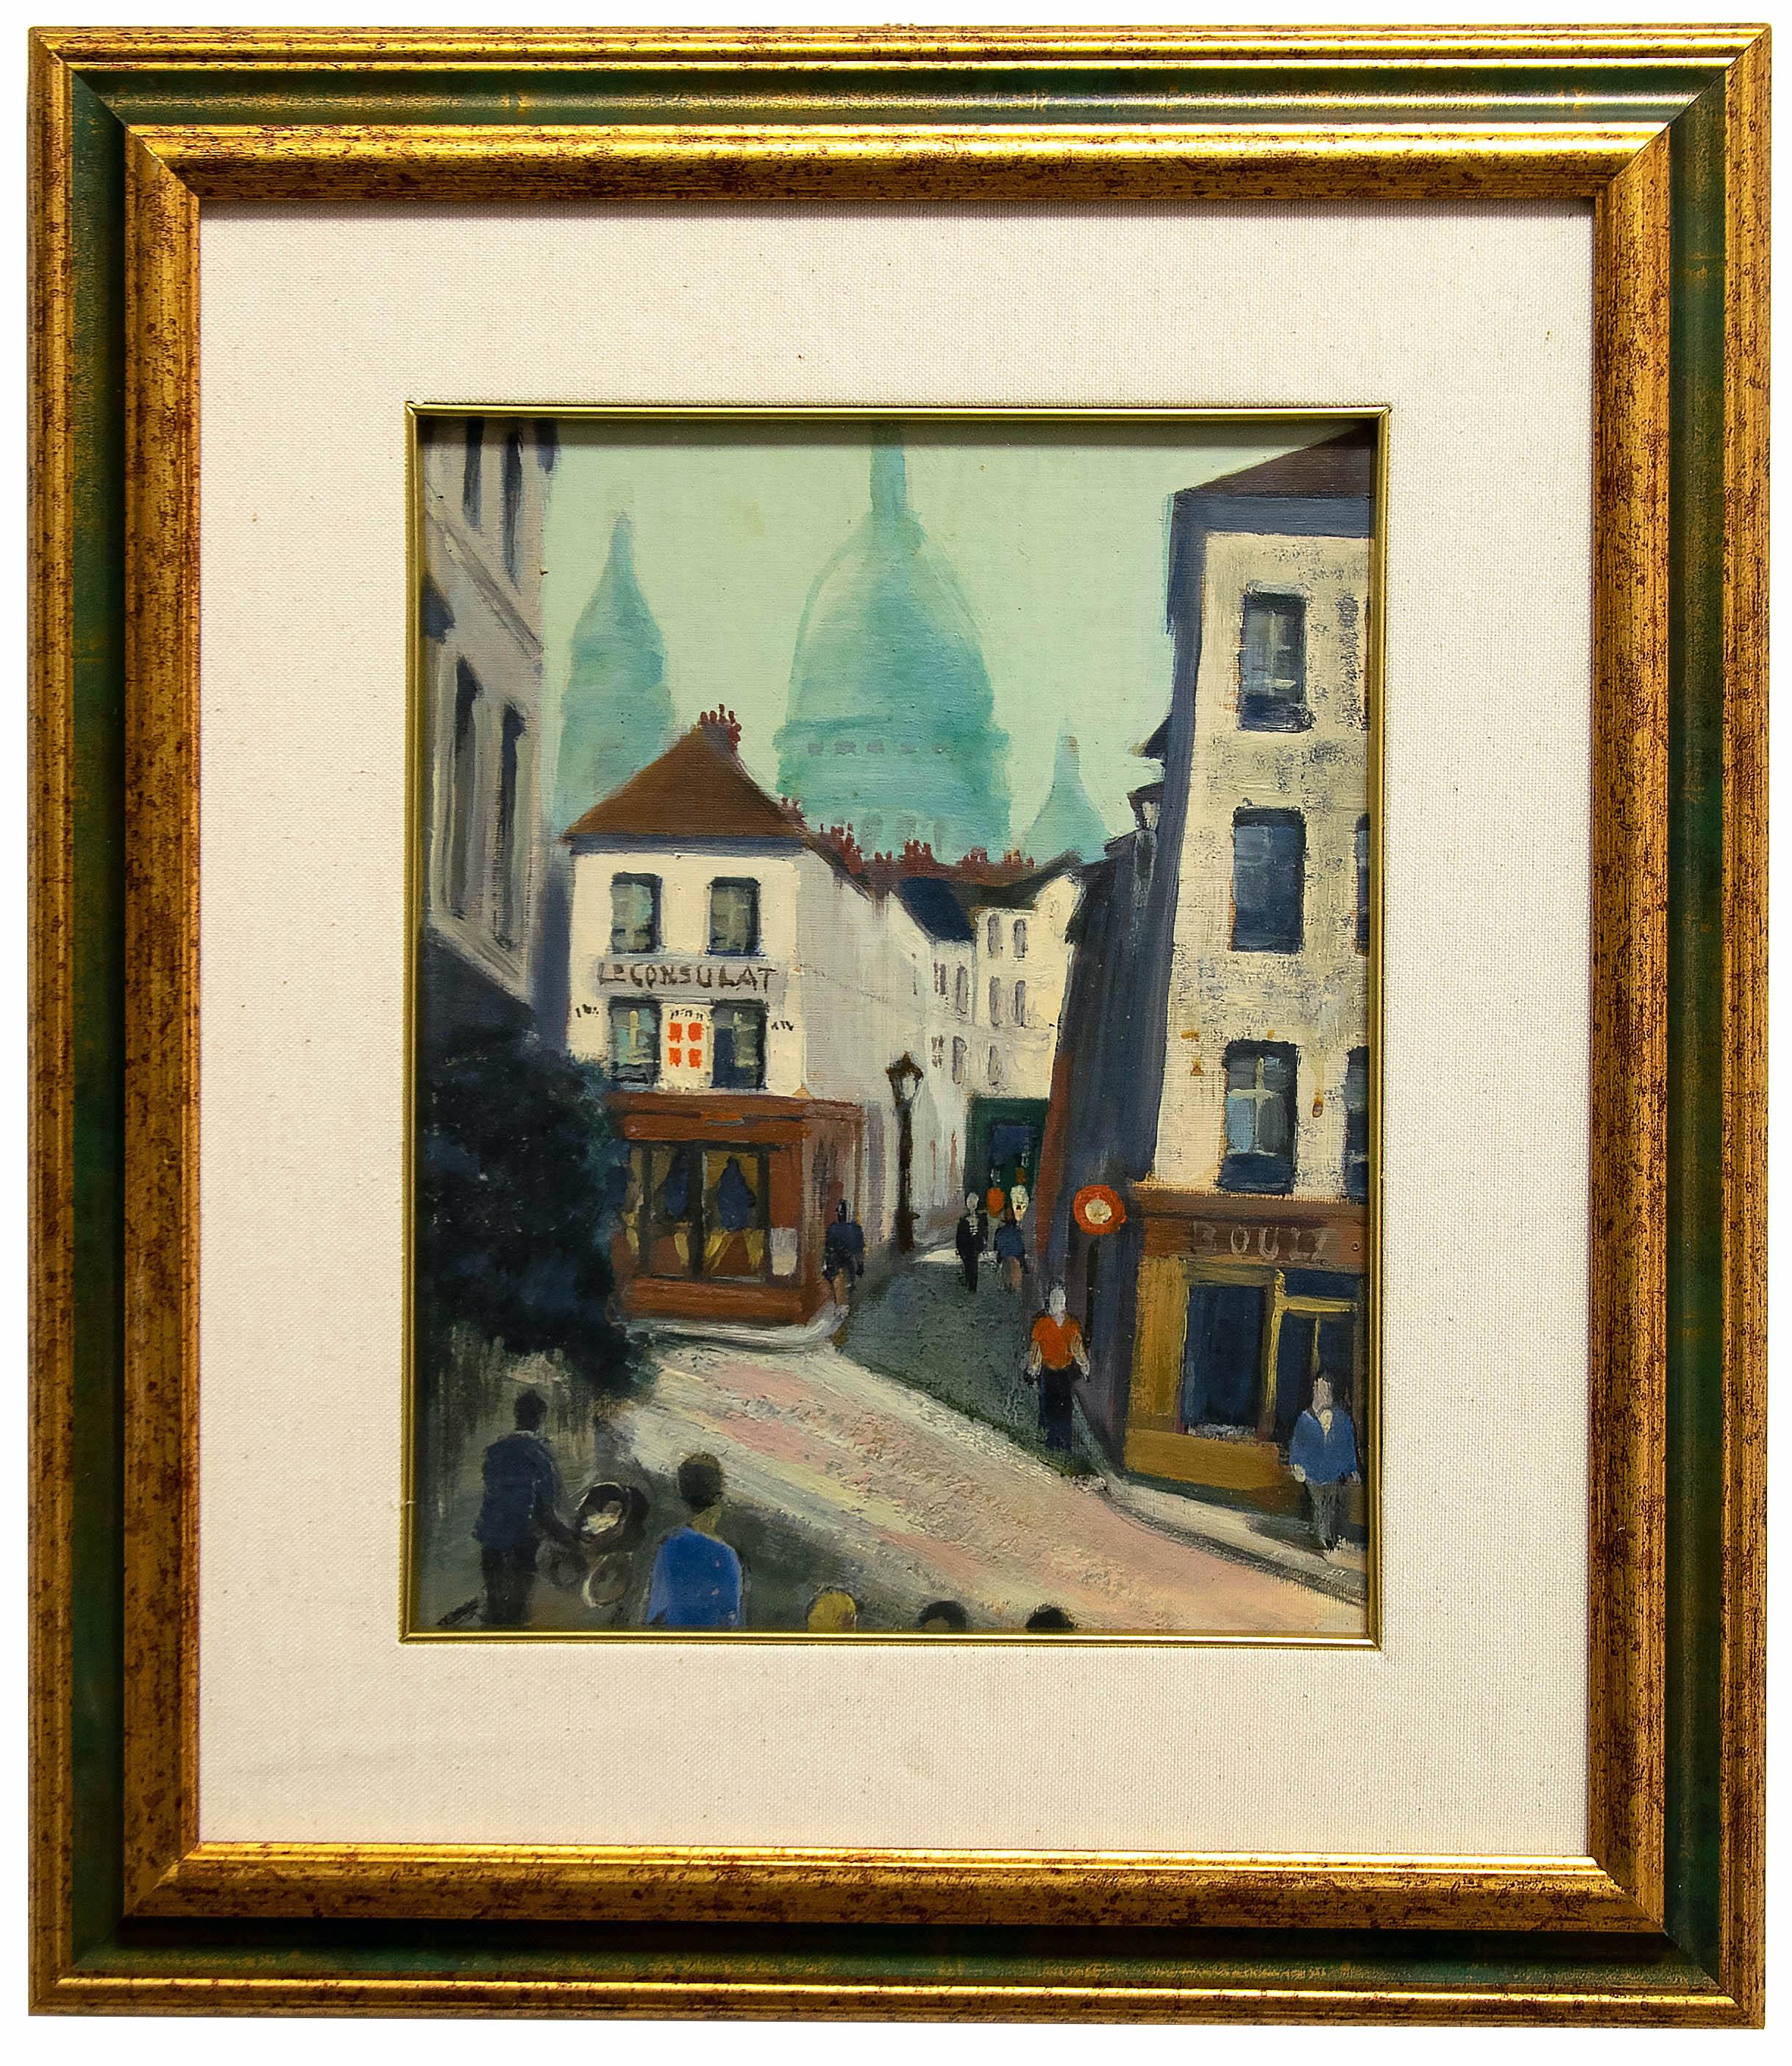 Unknown Landscape Painting - View of Paris - Original Oil on Cardboard by French Artist - Mid-20th Century